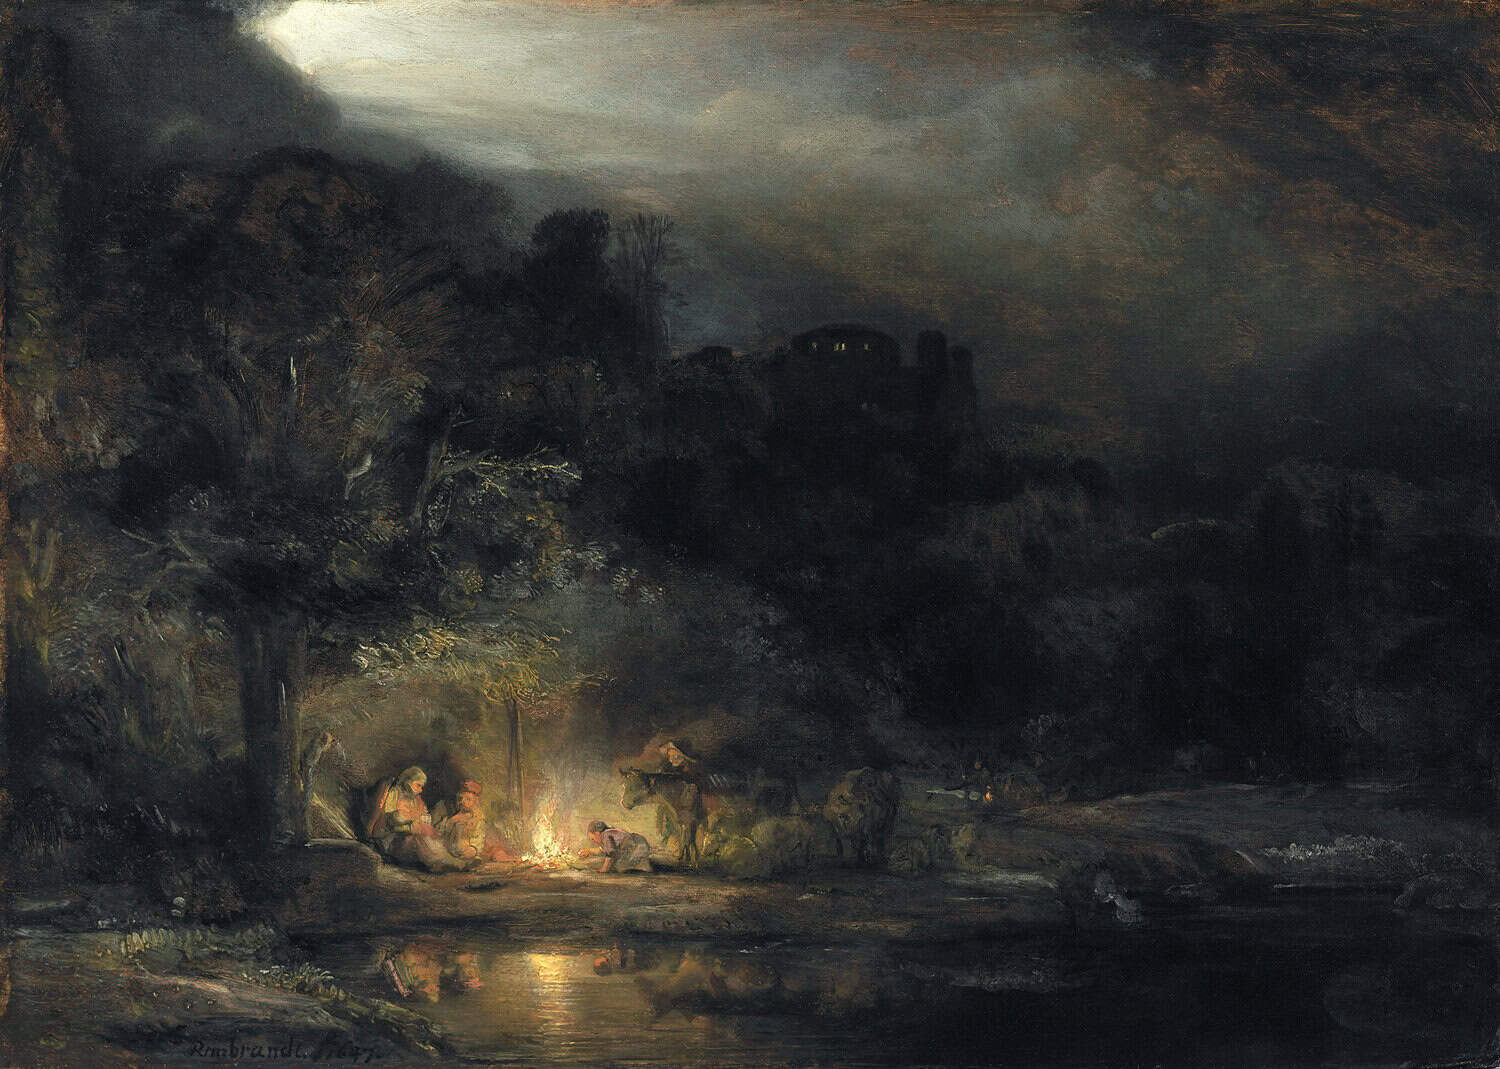 Rembrandt's painting of The Flight to Egypt